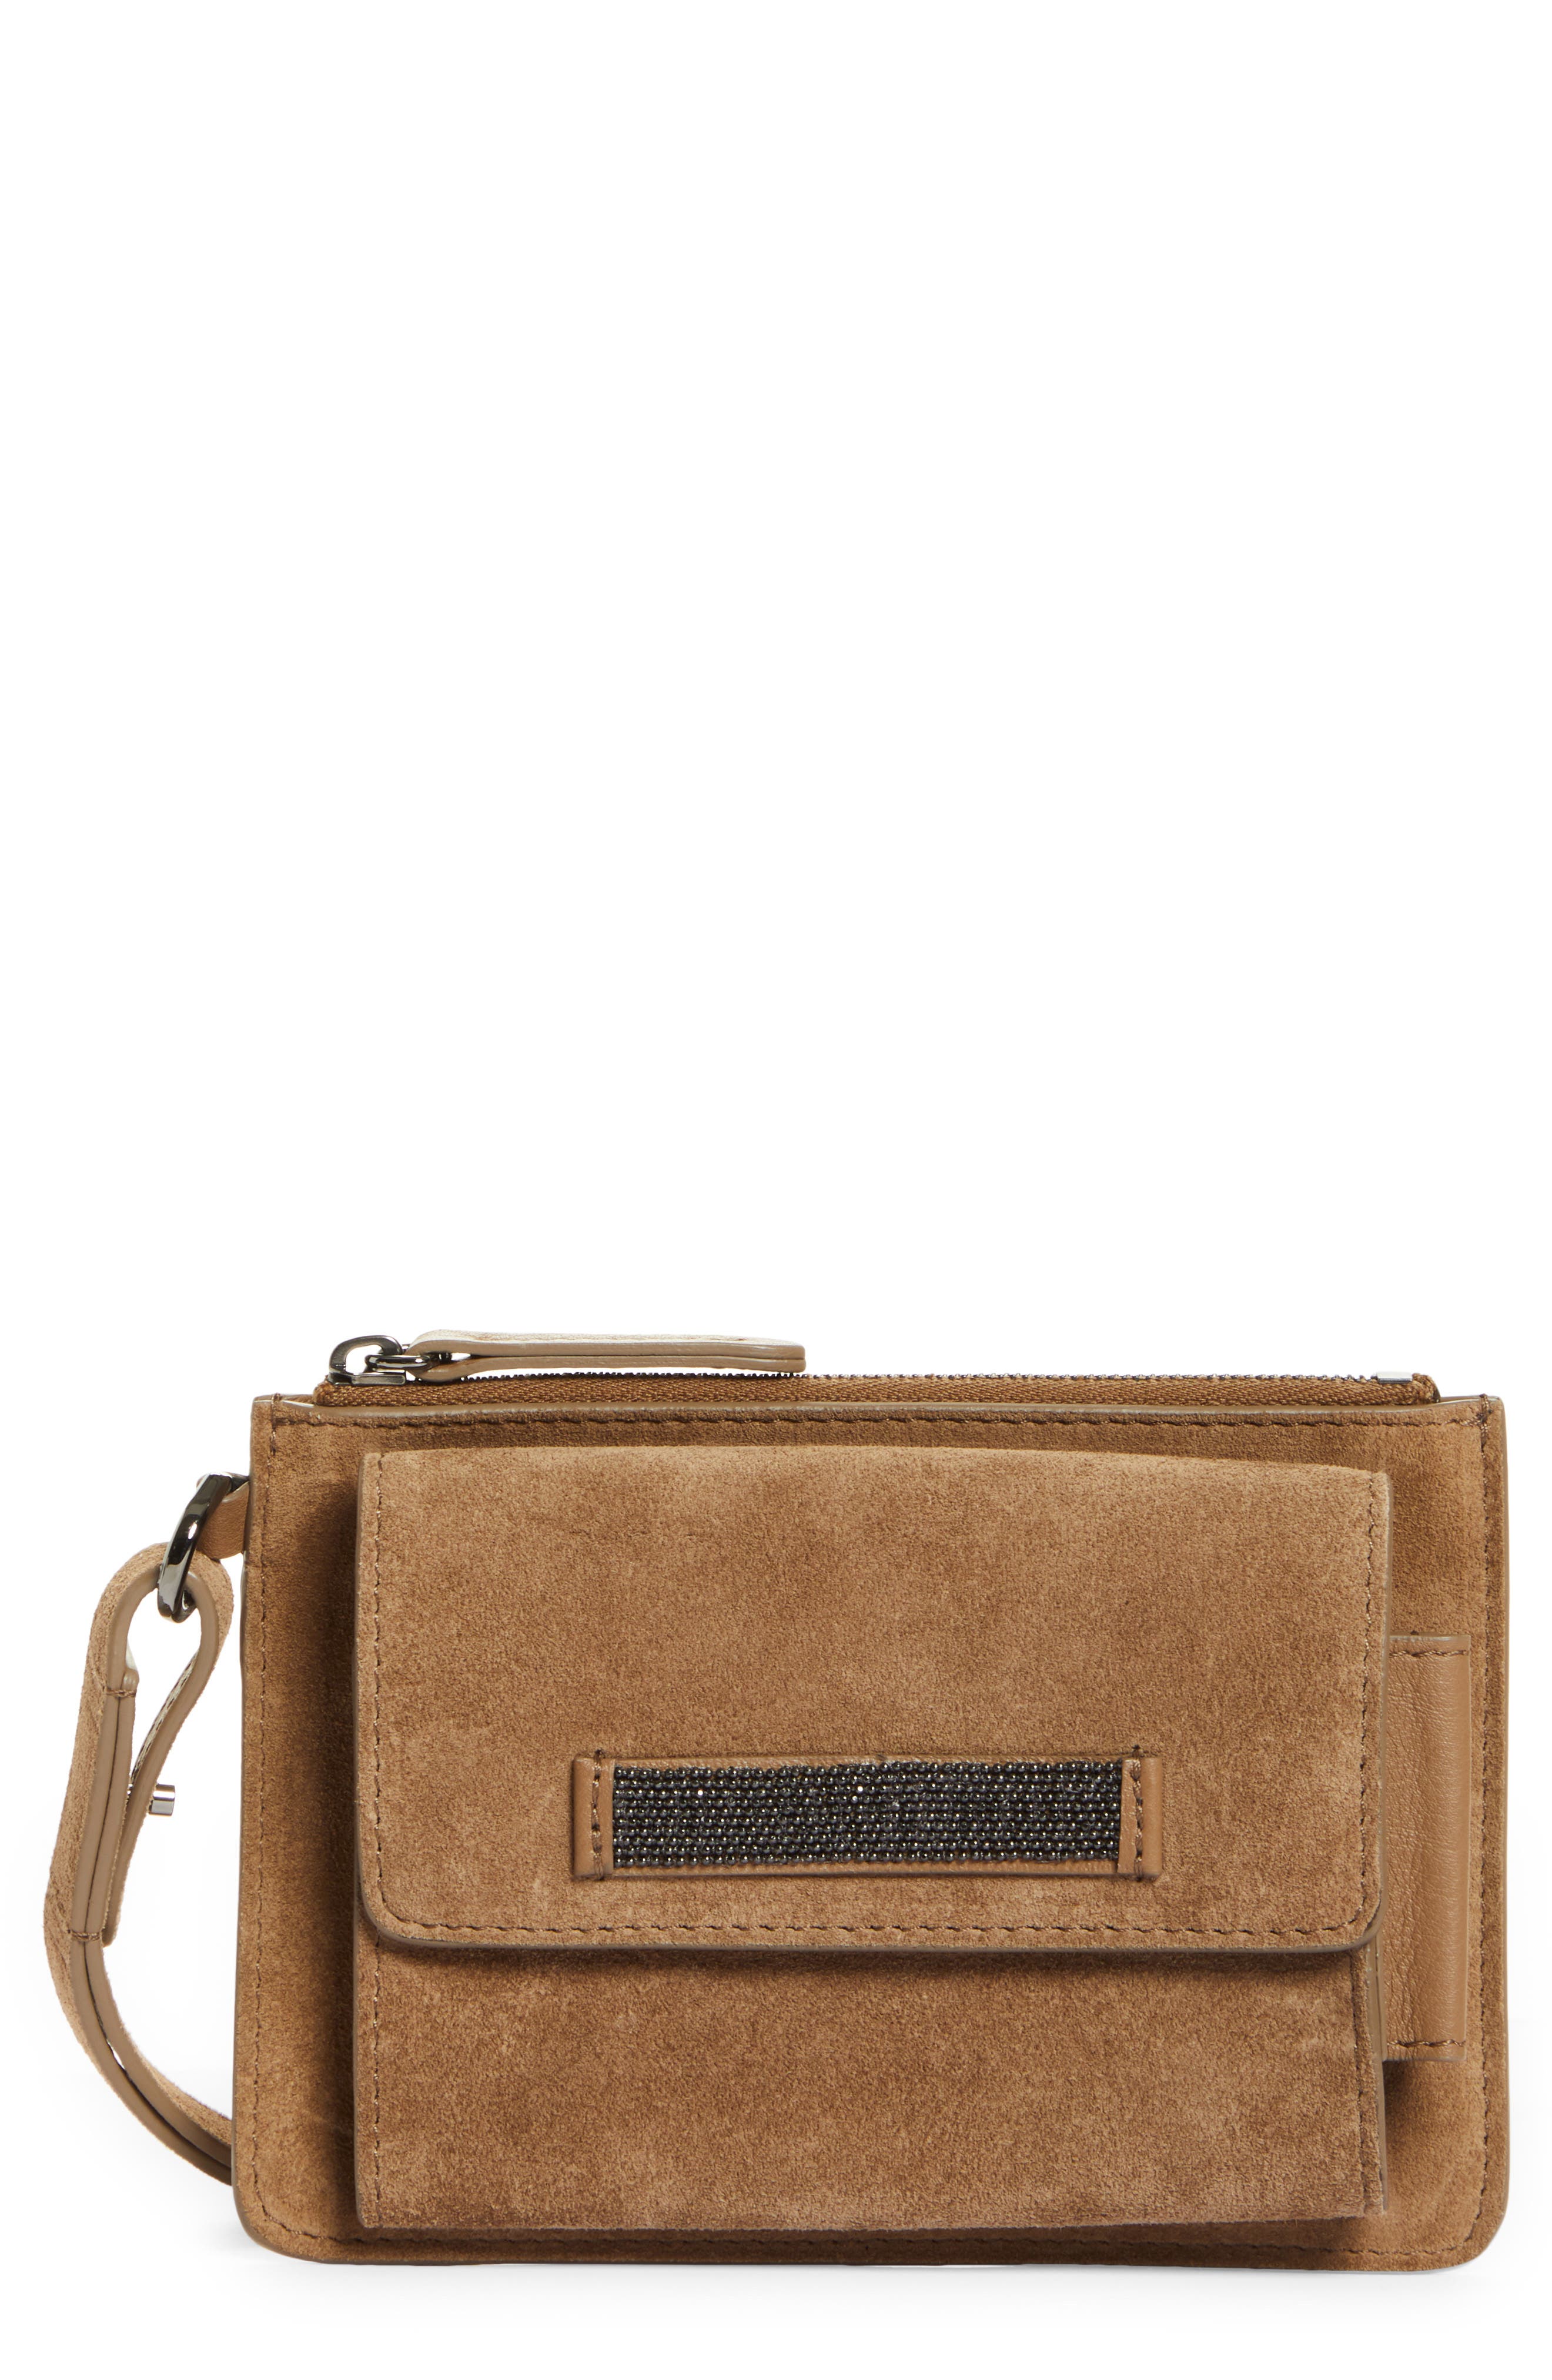 Brunello Cucinelli Suede Wristlet in New Ice at Nordstrom